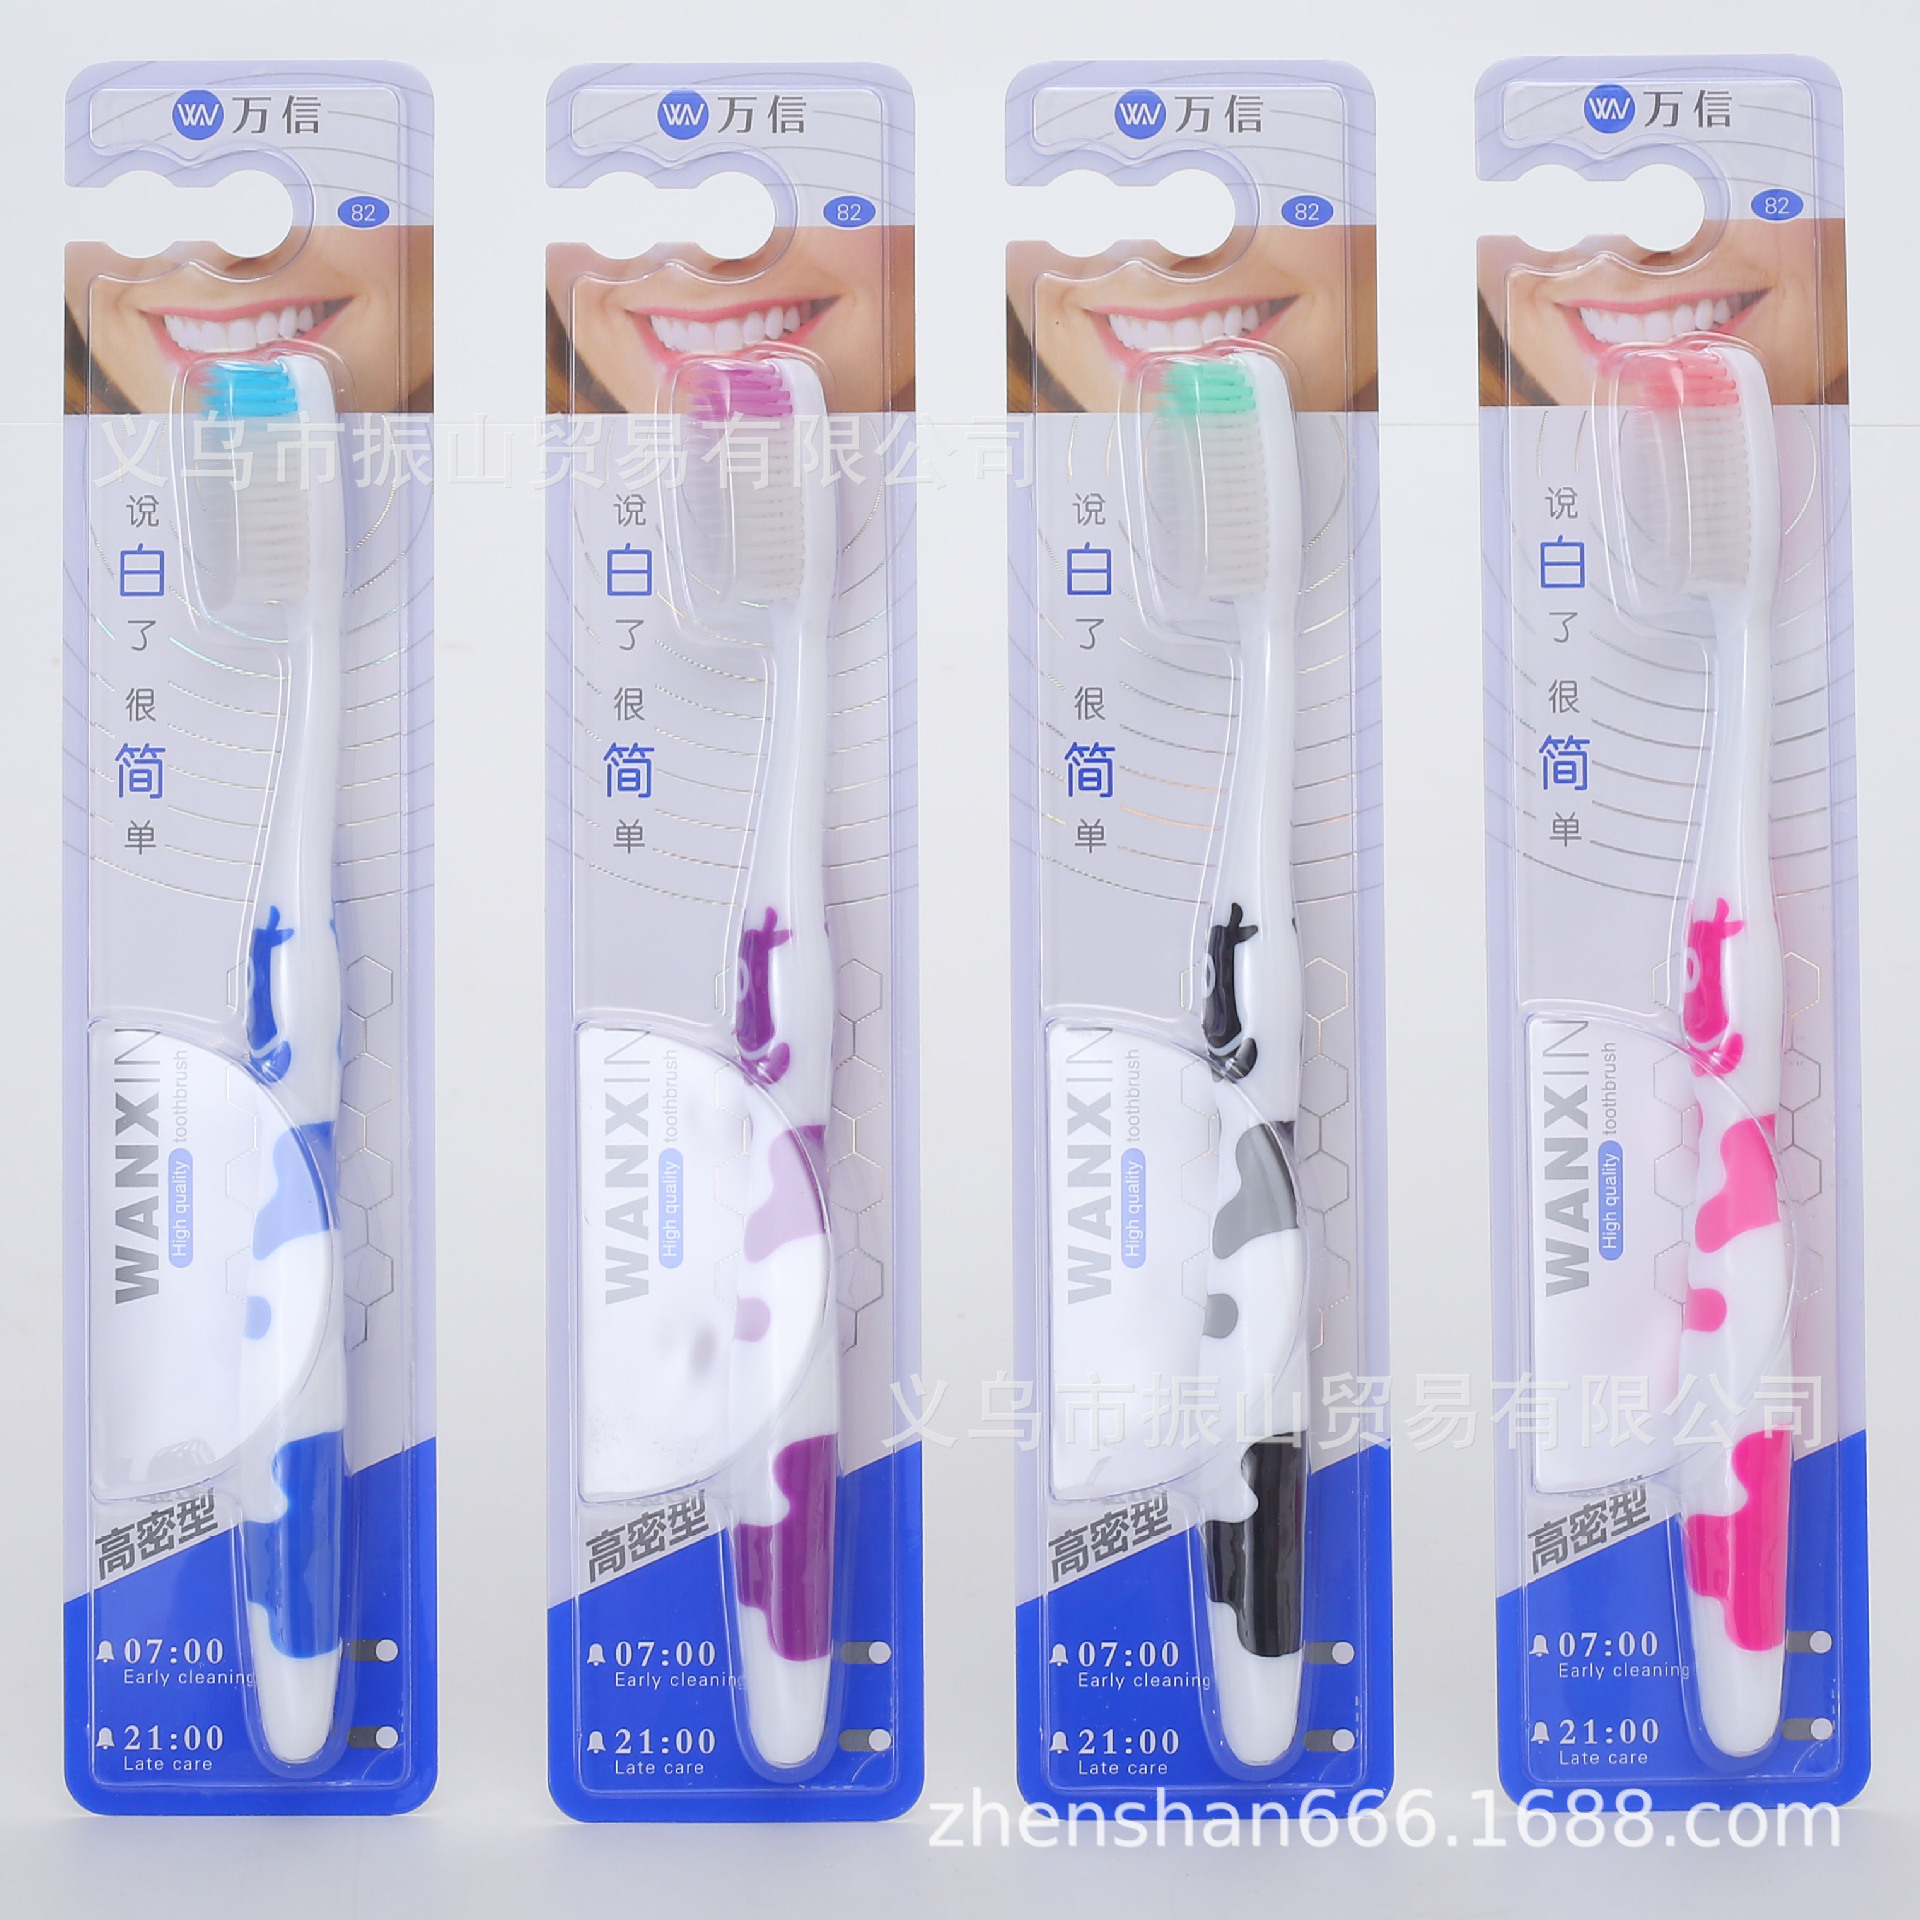 wanxin 82 paper box fine cleaning and fashion type high density soft-bristle toothbrush